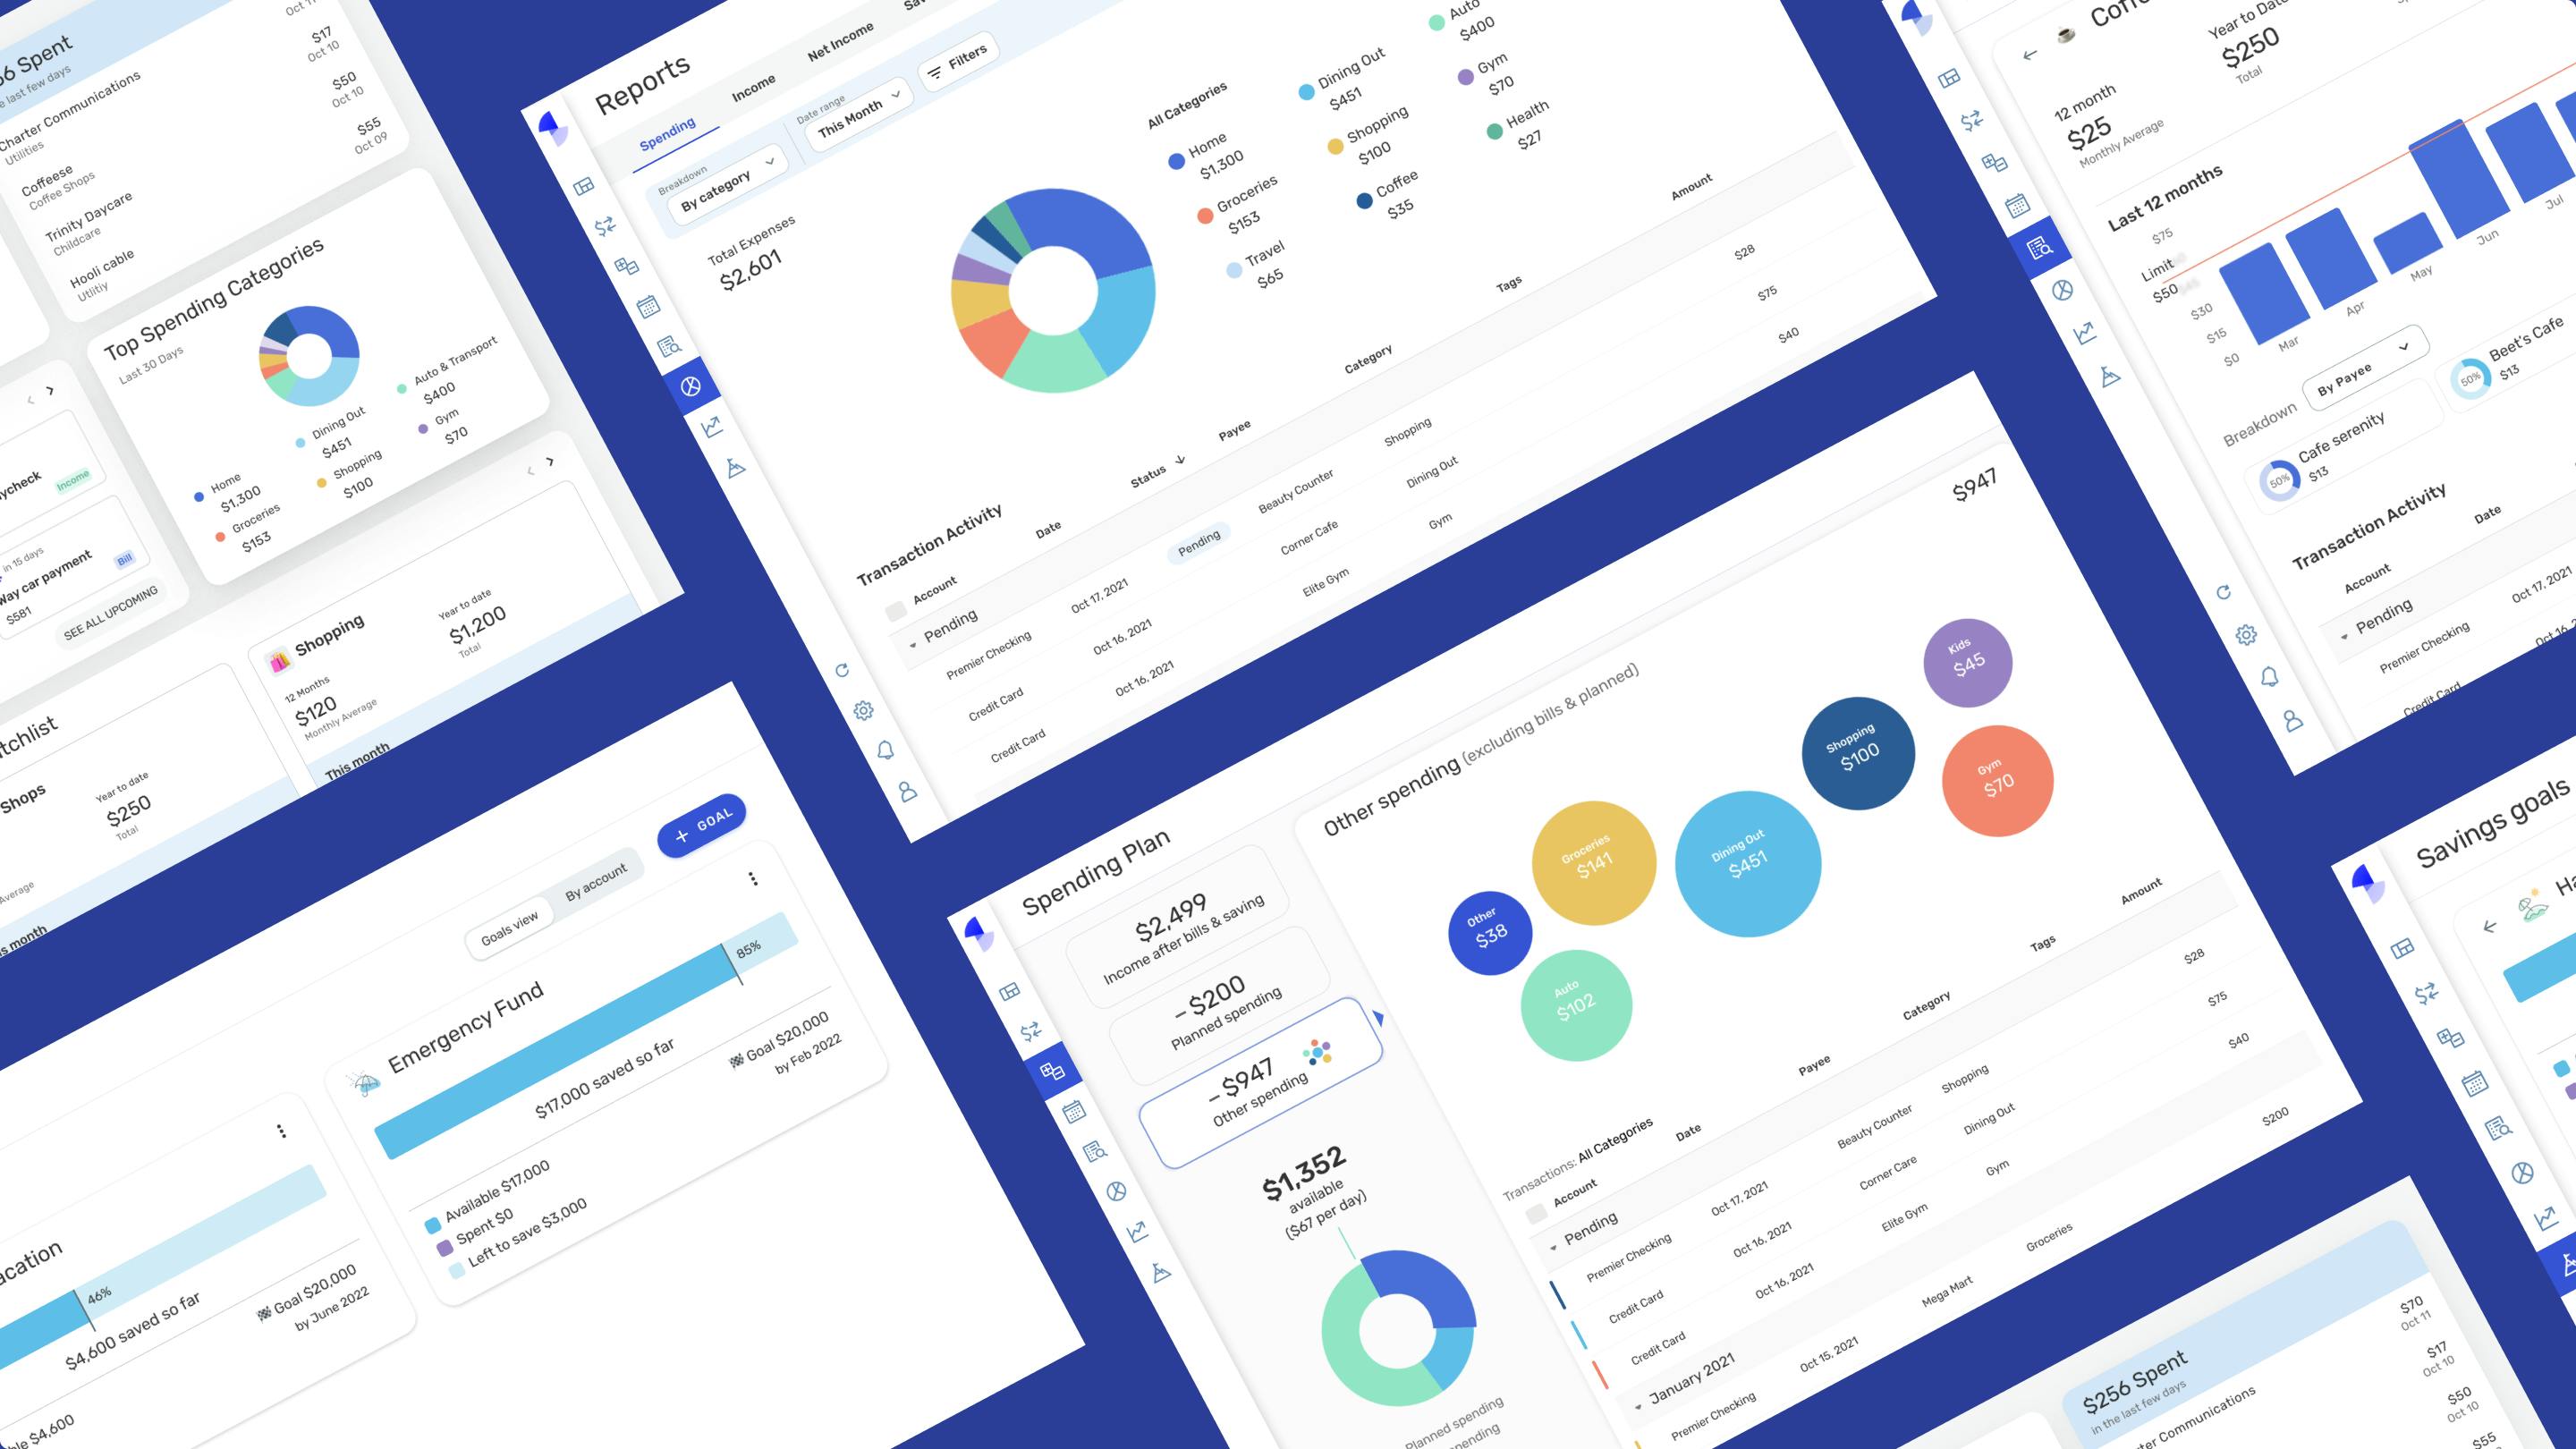 Different screenshots of the Simplifi user interface, focusing in on the Reports and Spending Plan screens.